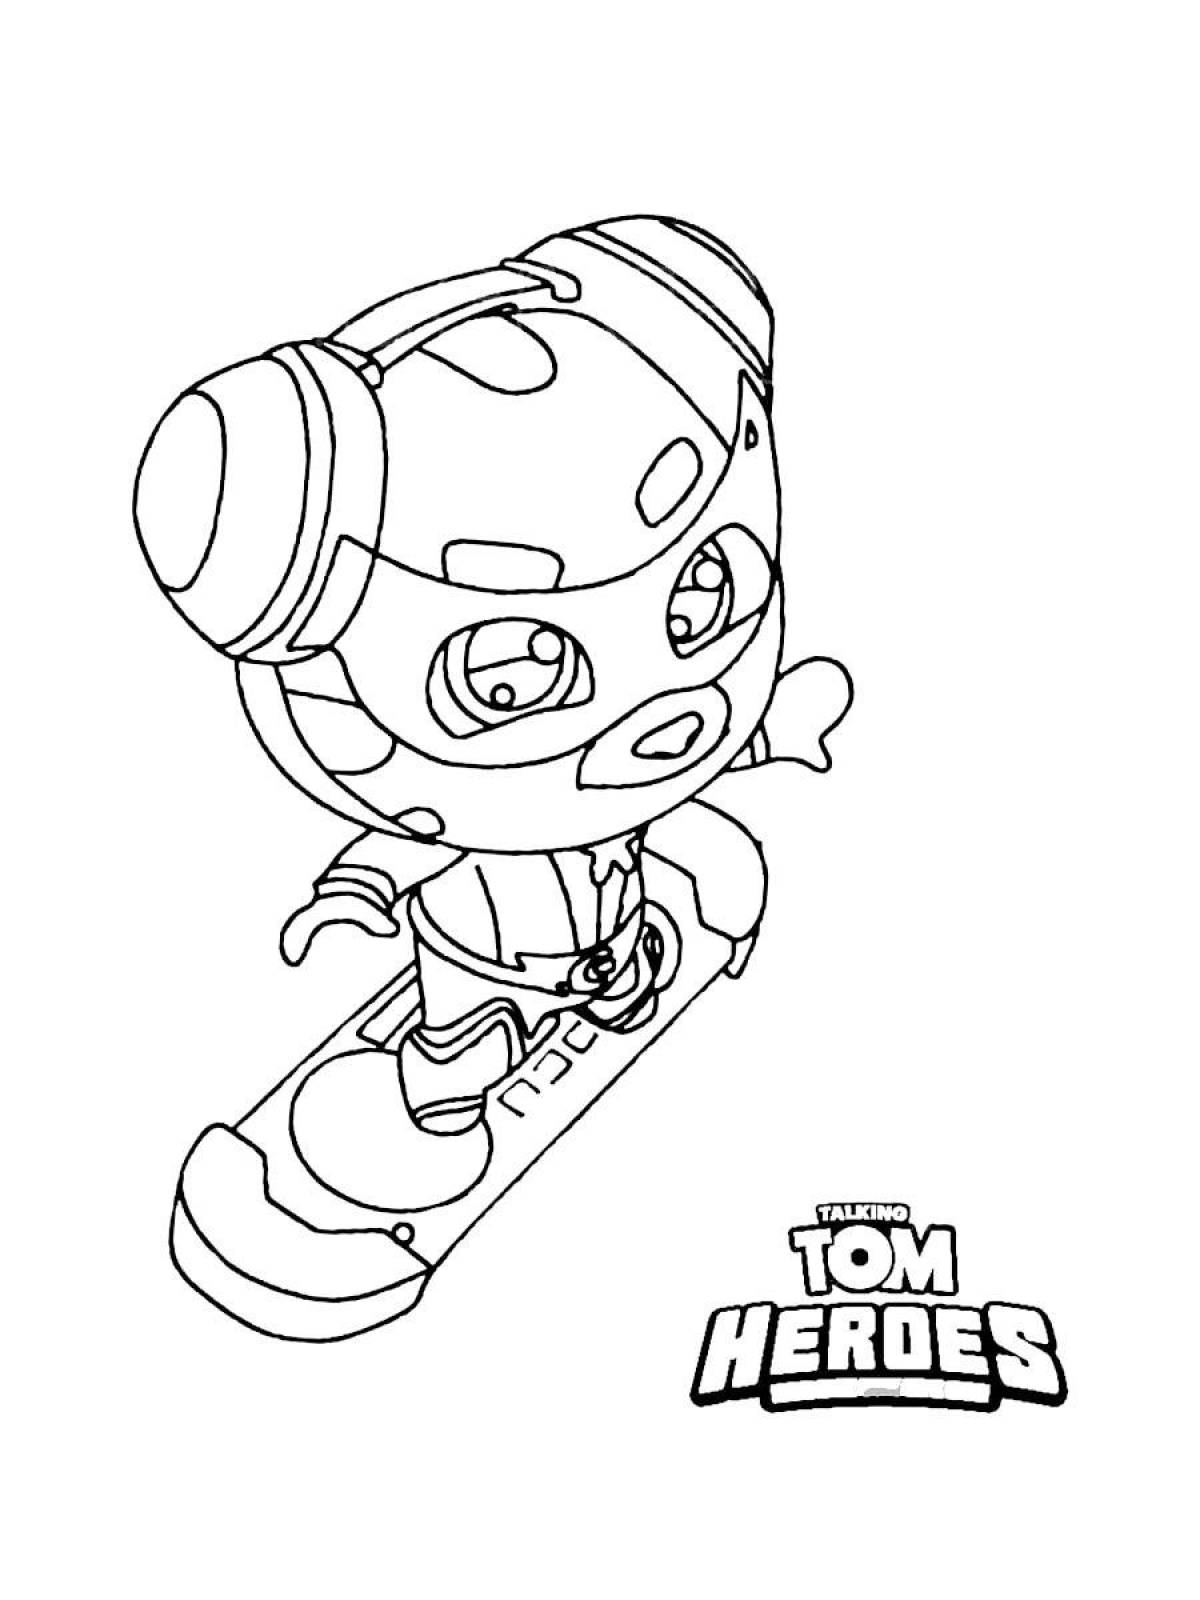 Tom's dynamic coloring page